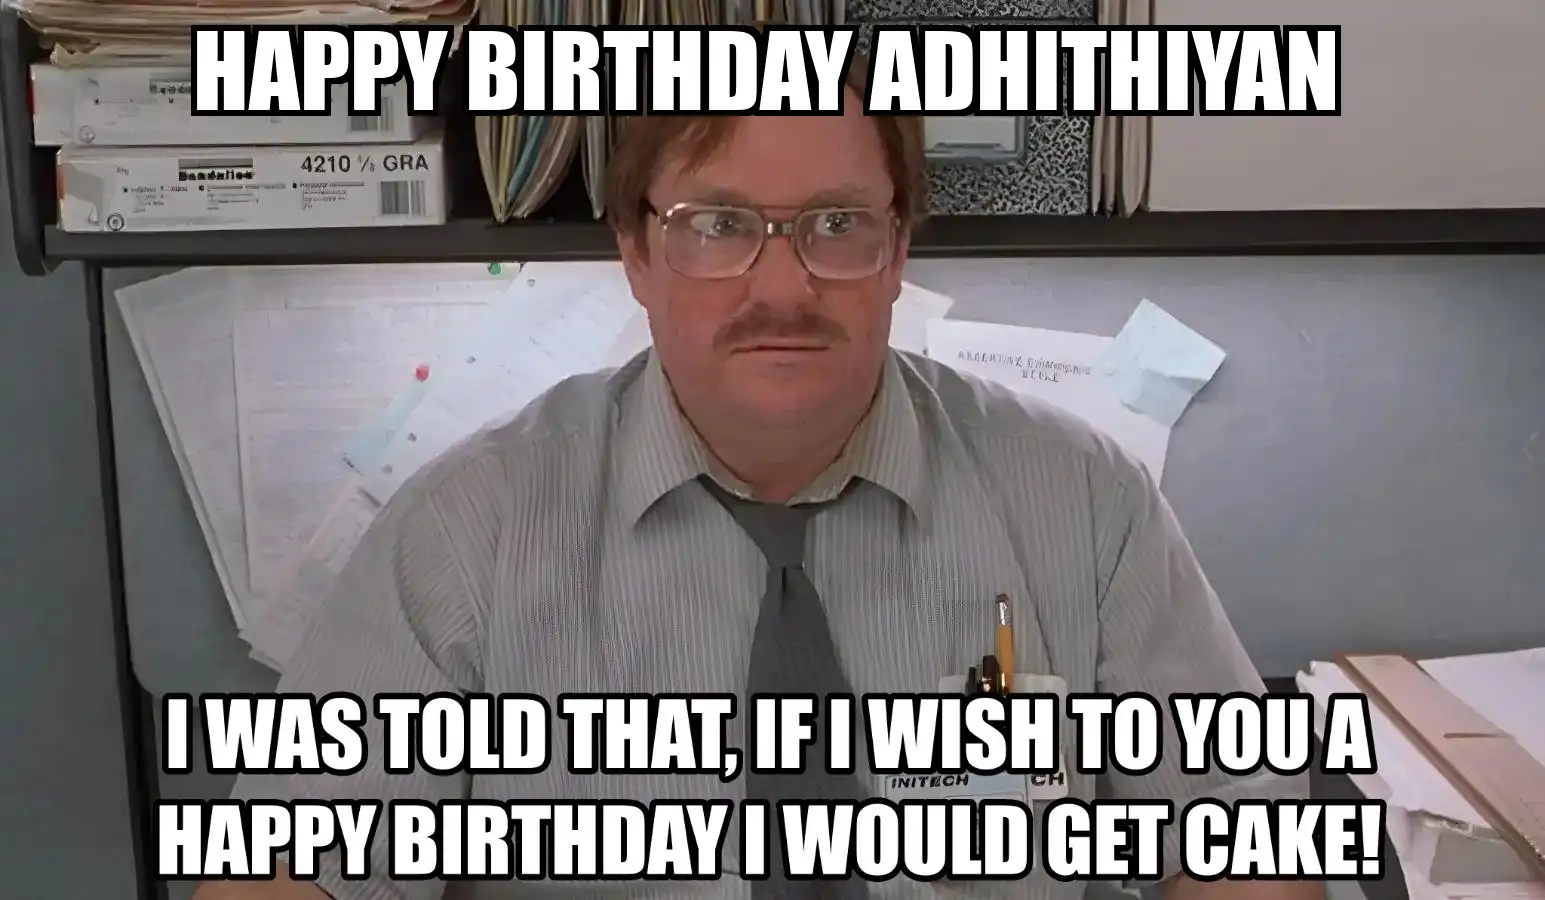 Happy Birthday Adhithiyan I Would Get A Cake Meme